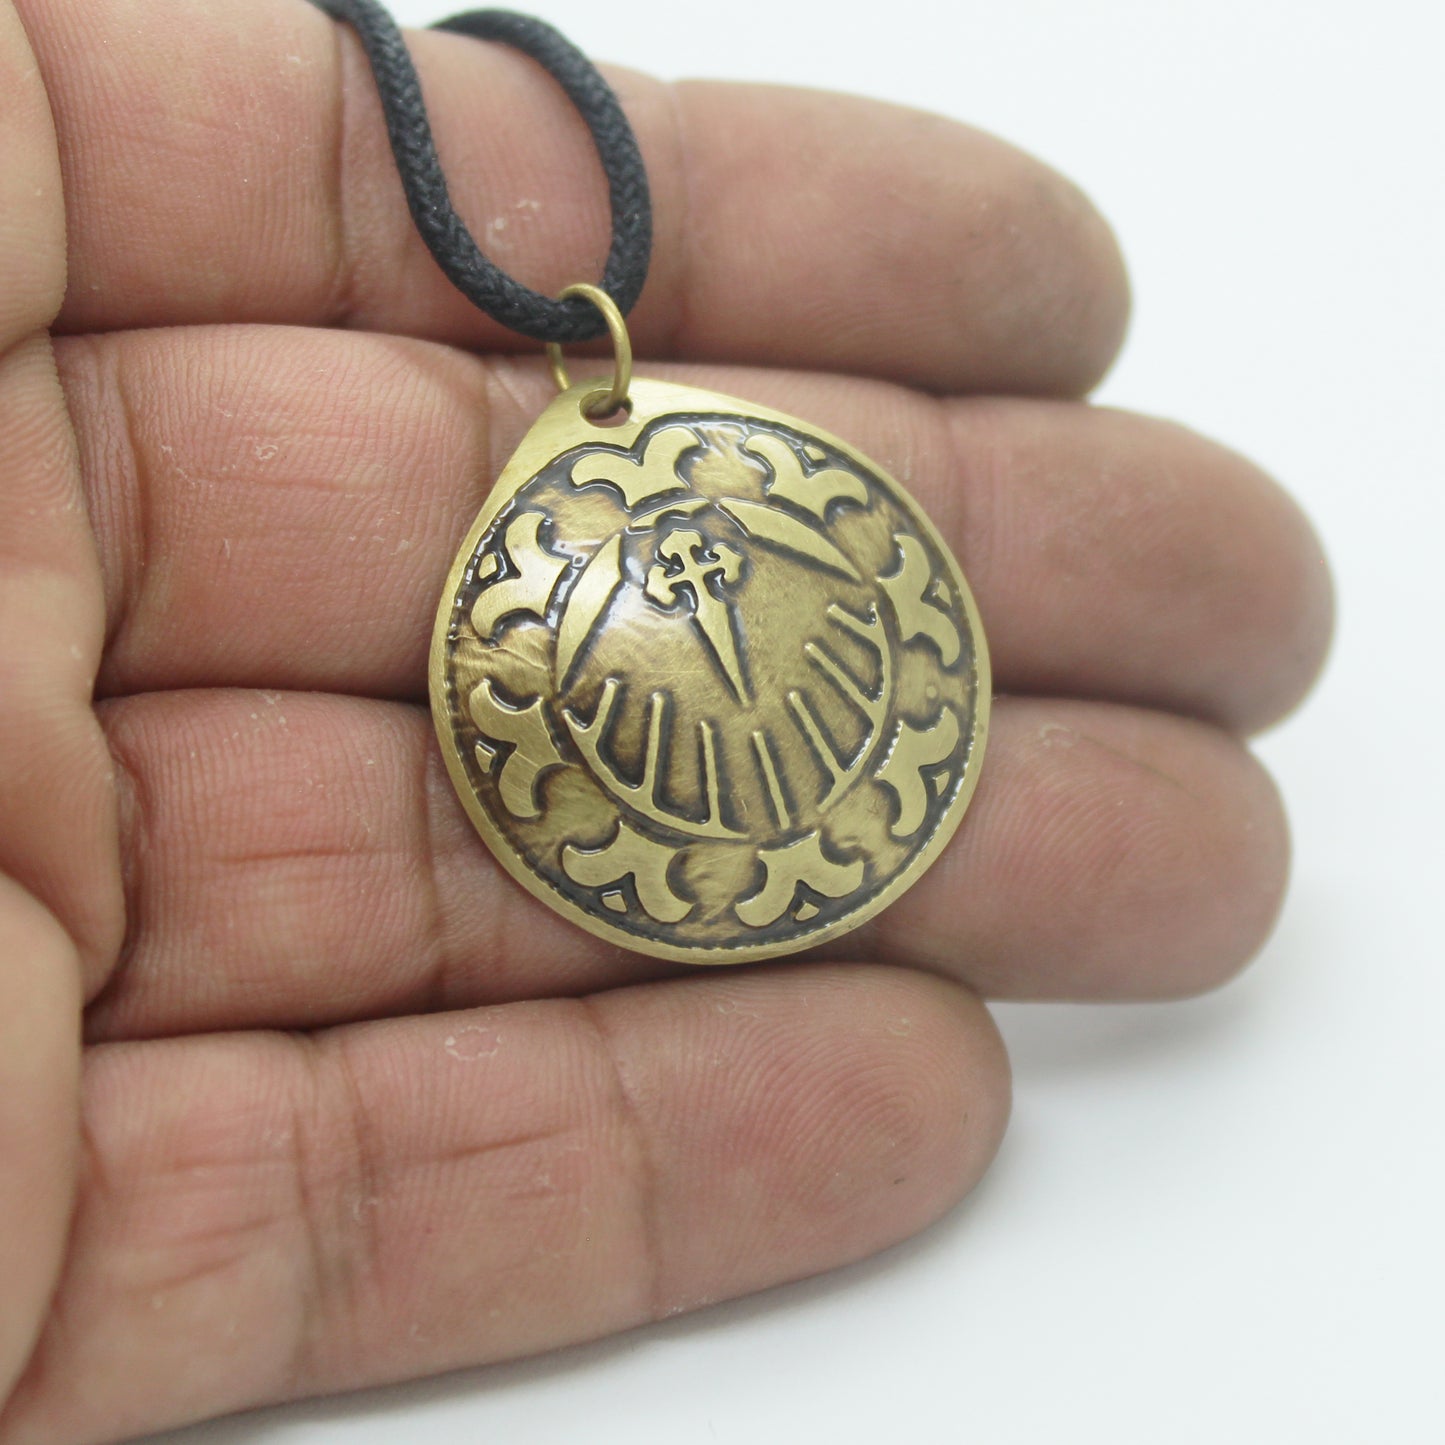 Convex Brass Pendant with Shell and Engraved Cross for the Camino de Santiago